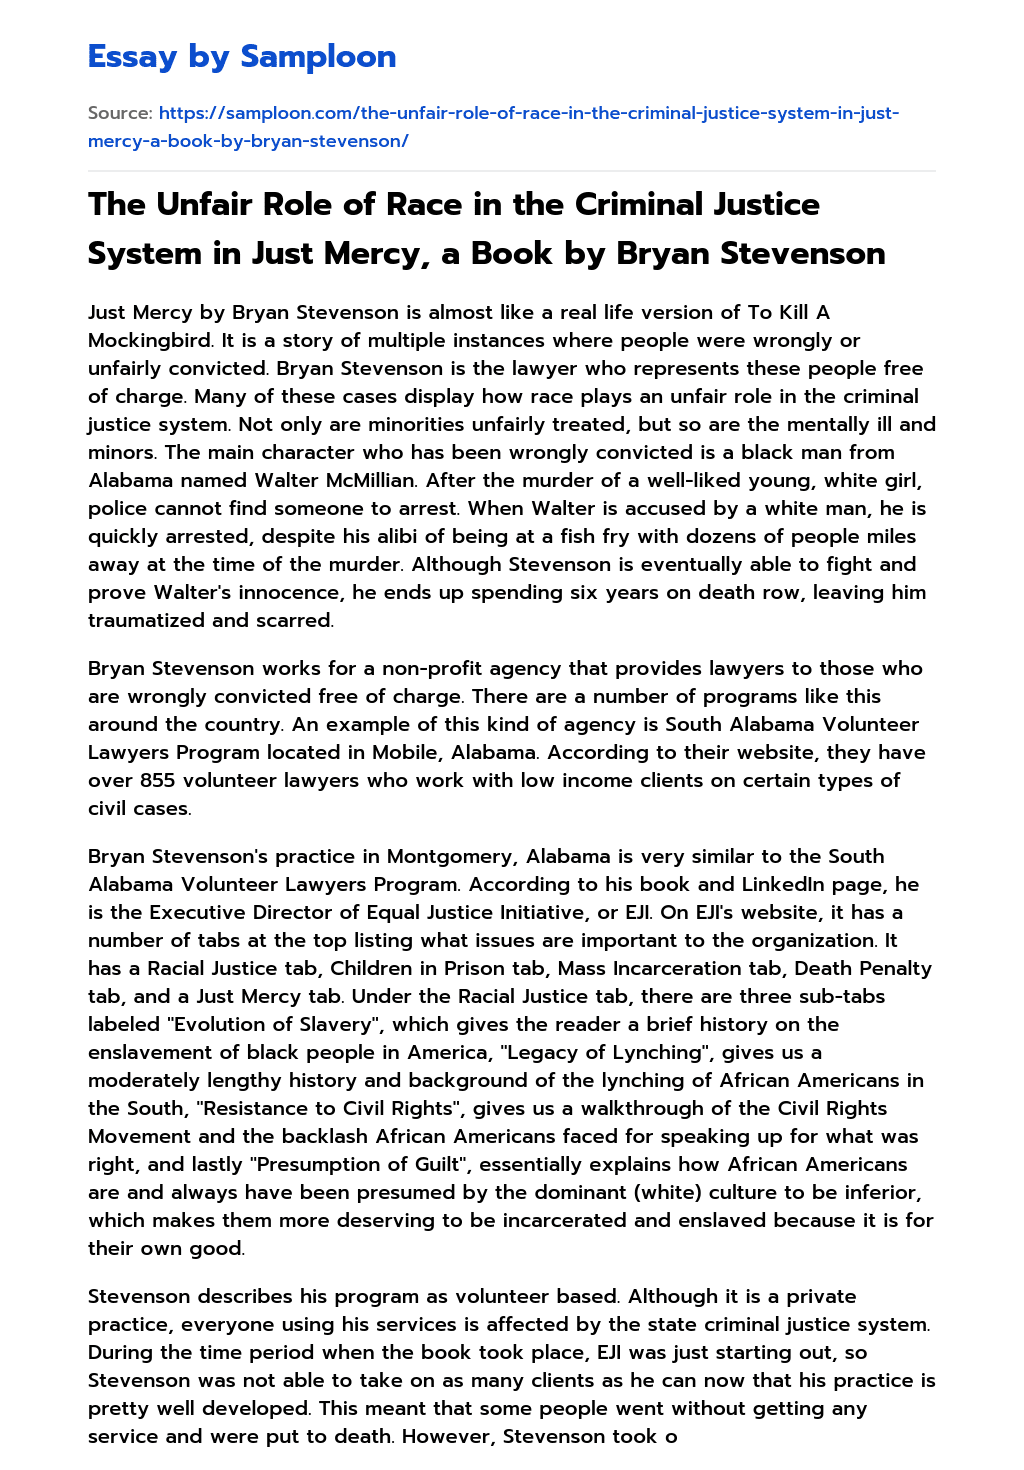 The Unfair Role of Race in the Criminal Justice System in Just Mercy, a Book by Bryan Stevenson essay